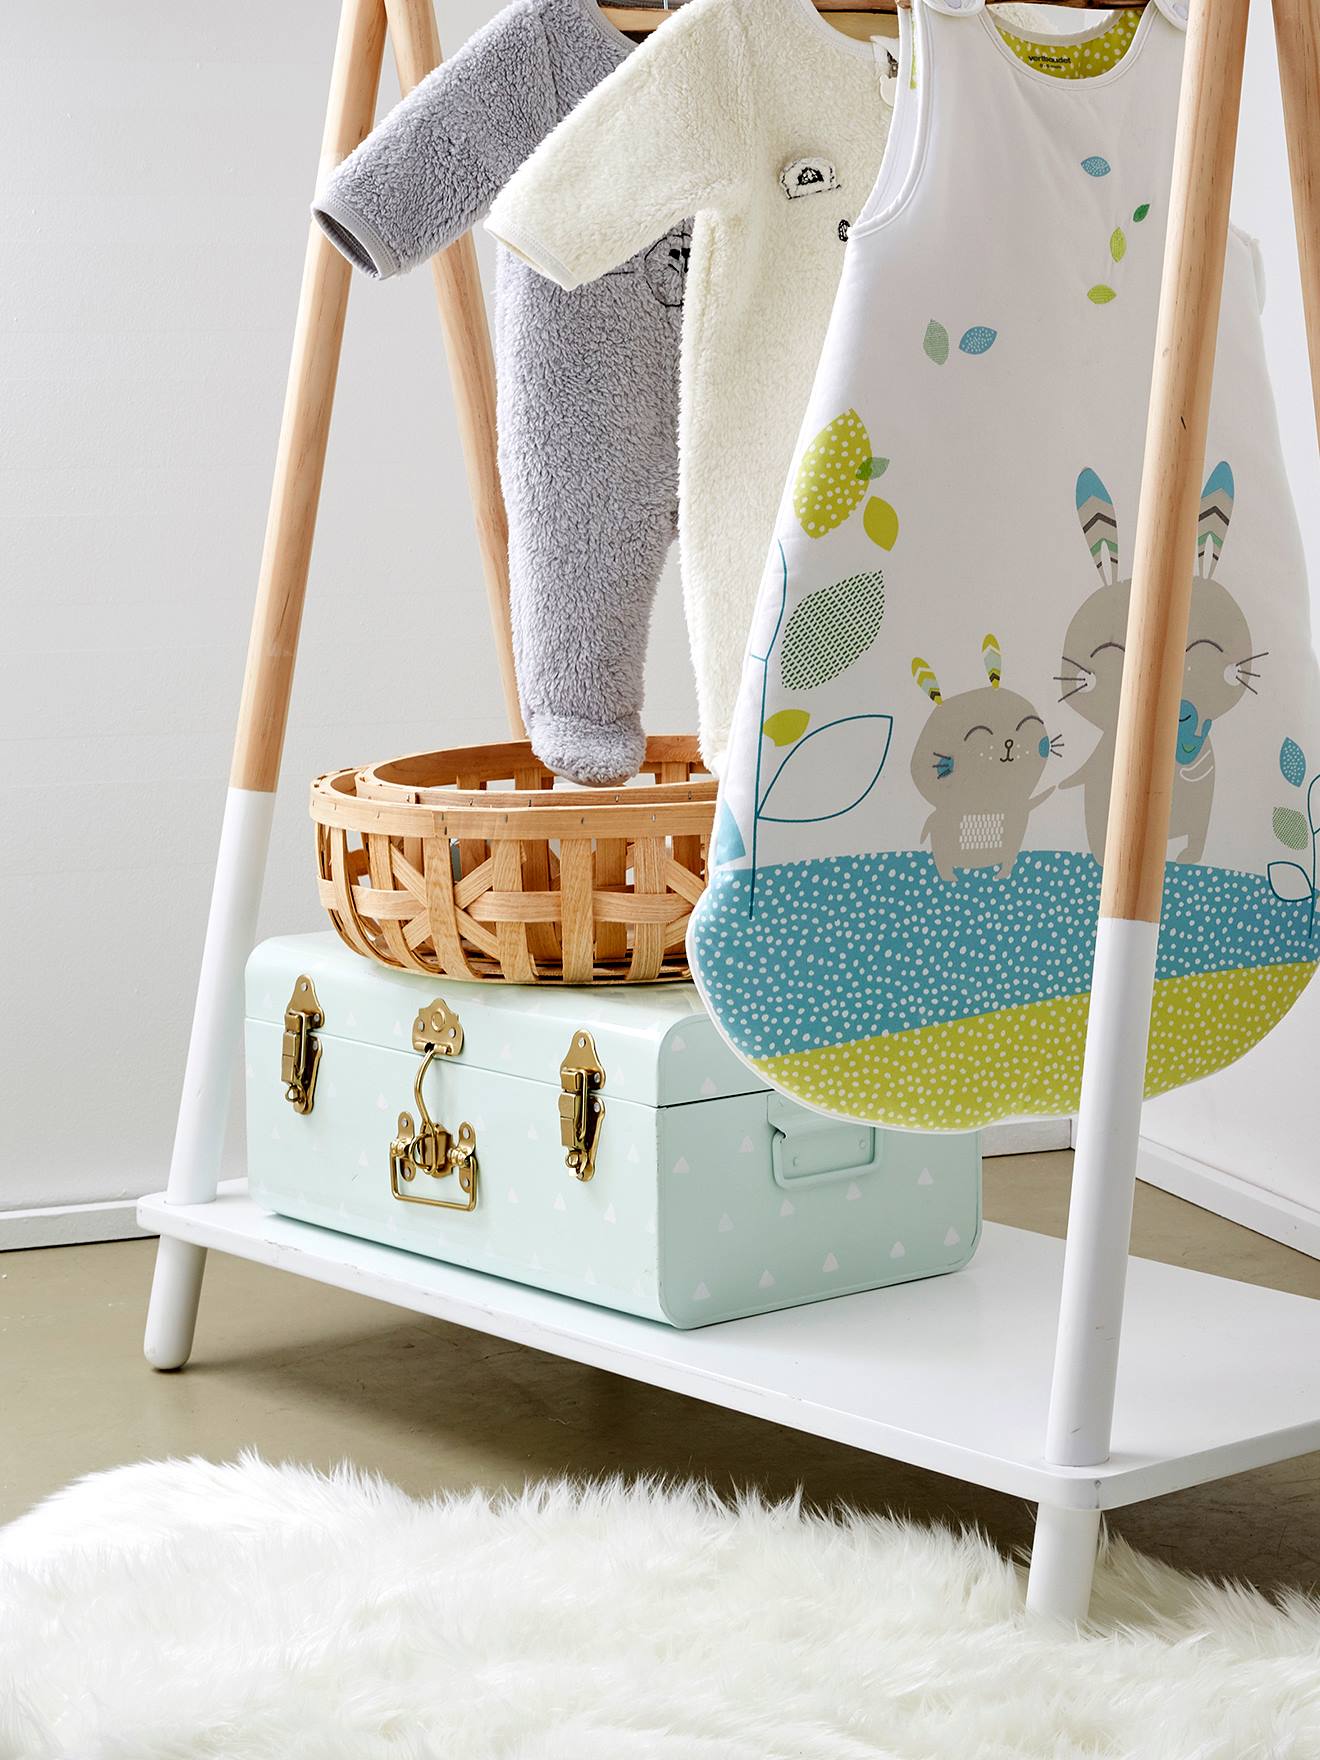 In addition to clothing, Vertbaudet extends its offerings to encompass a wide array of products for the nursery and beyond.